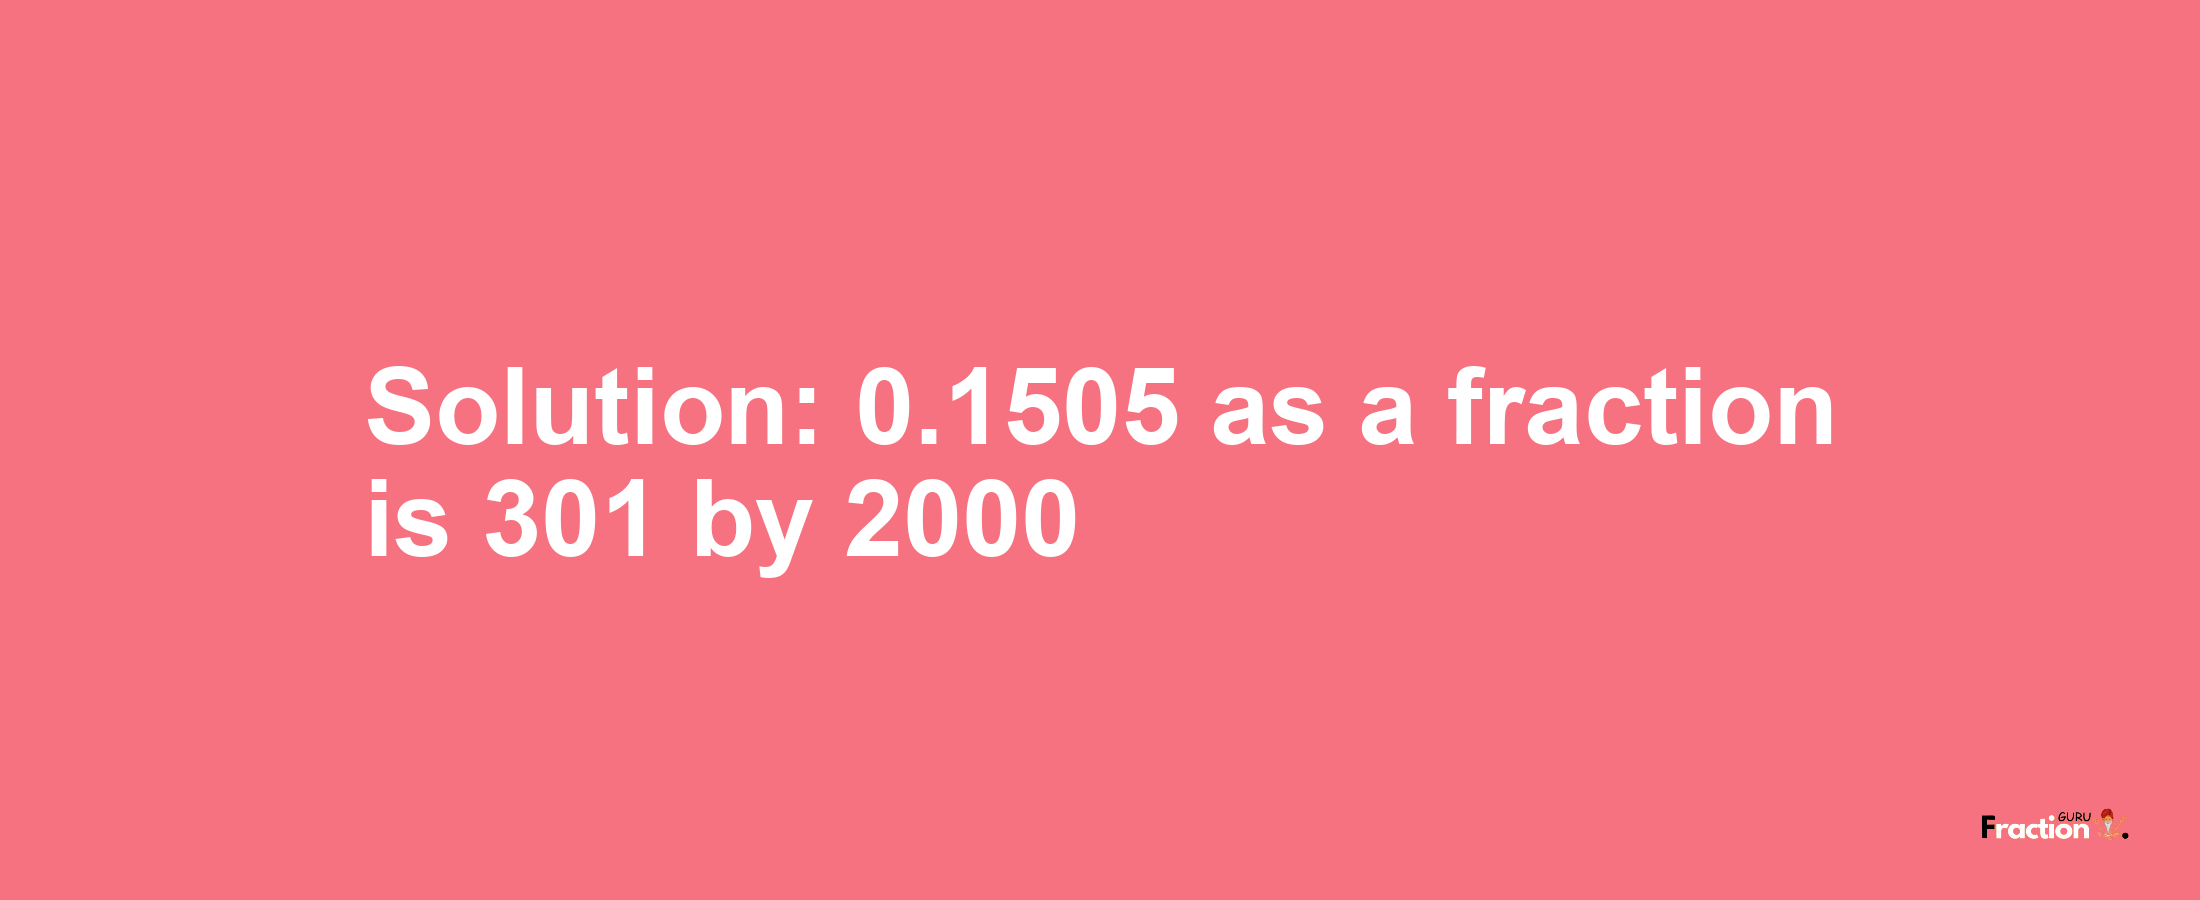 Solution:0.1505 as a fraction is 301/2000